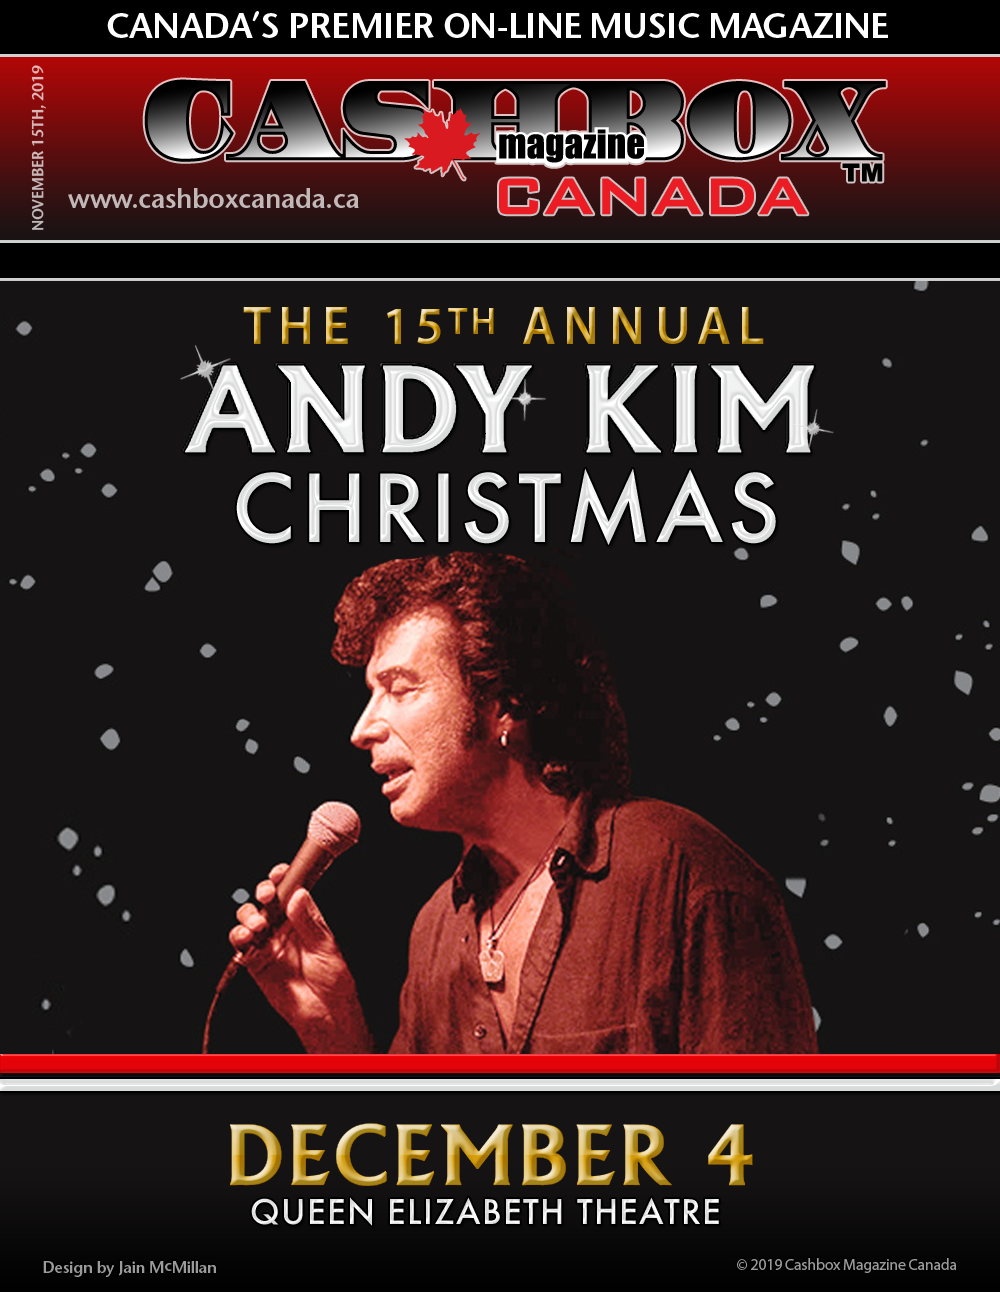 The 15th Annual Andy Kim Christmas